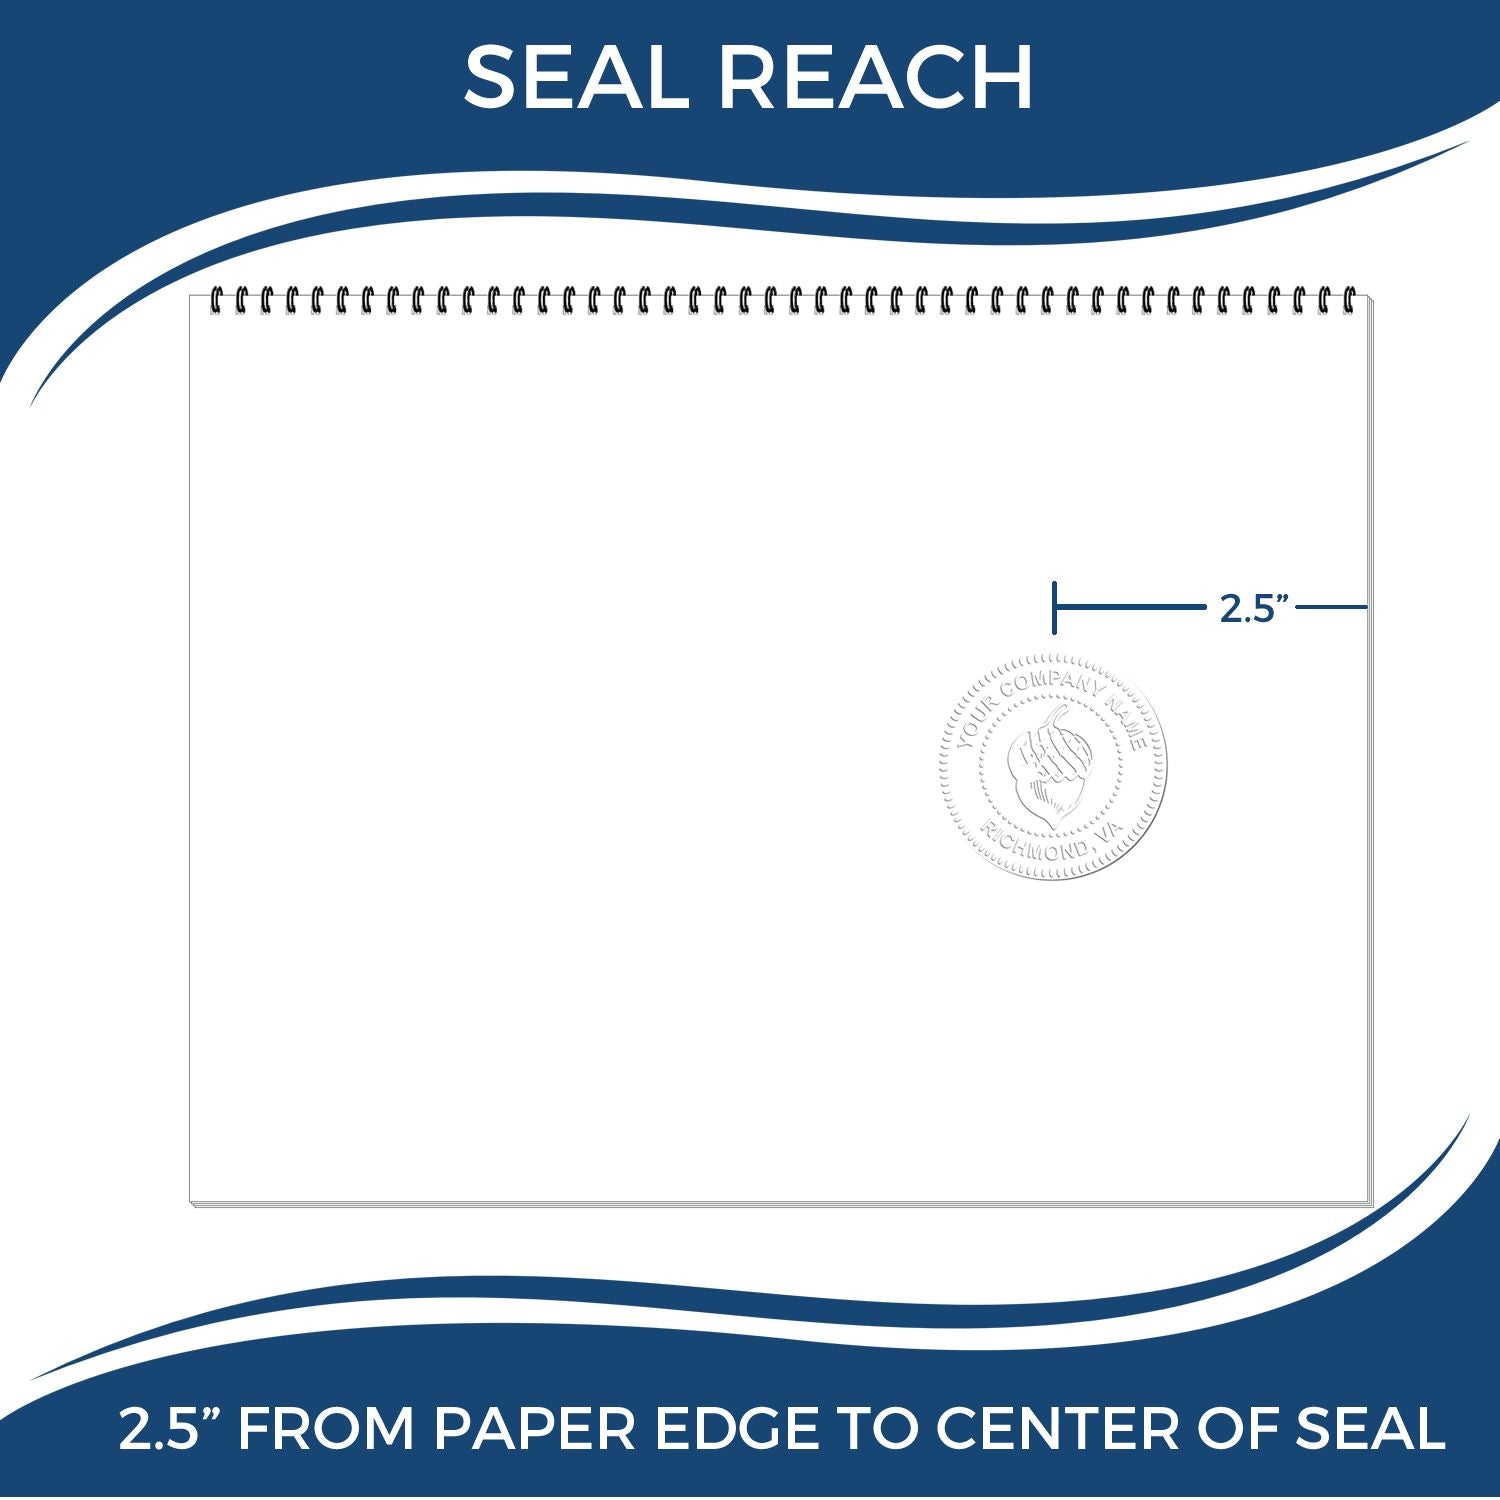 An infographic showing the seal reach which is represented by a ruler and a miniature seal image of the Heavy Duty Cast Iron Arkansas Architect Embosser